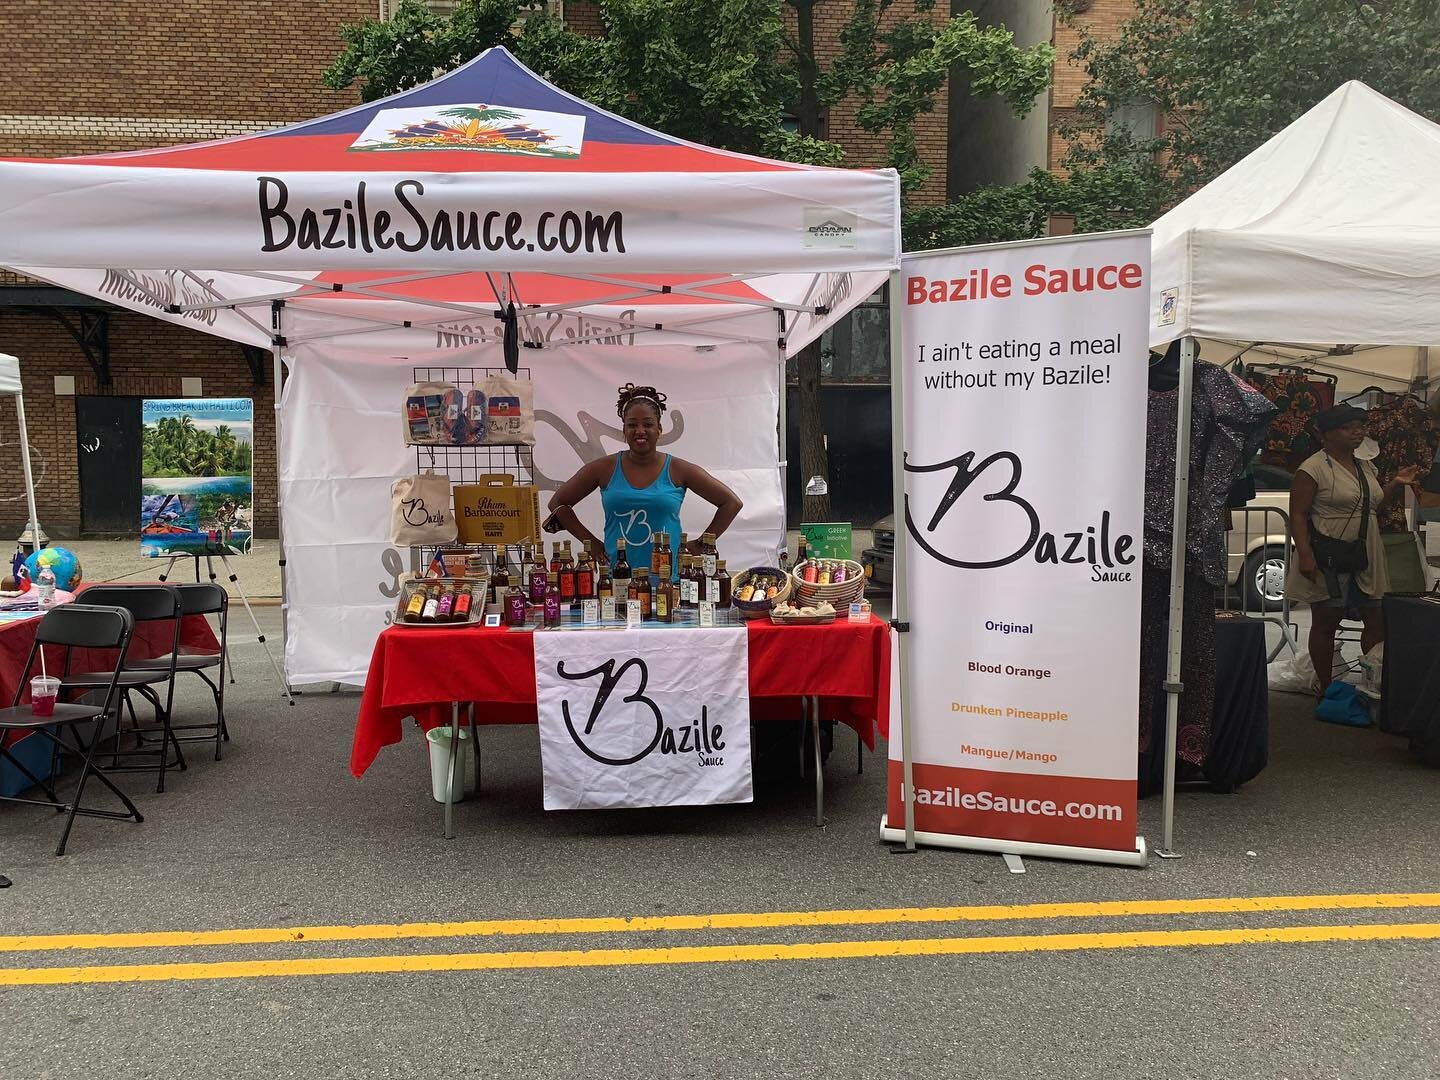 @goafricacarnival today in Harlem. 116! My hood ✊🏾✊🏾 stop by when you have a moment loves. 💫

Purchase ➡️ BazileSauce.com 
Select bottles Sold @lakoucafe
⬆️Link In Bio⬆️

#bazilesauce #sauceboss #sauce #veganfood #veganfriendly #sauces #bazilesauc